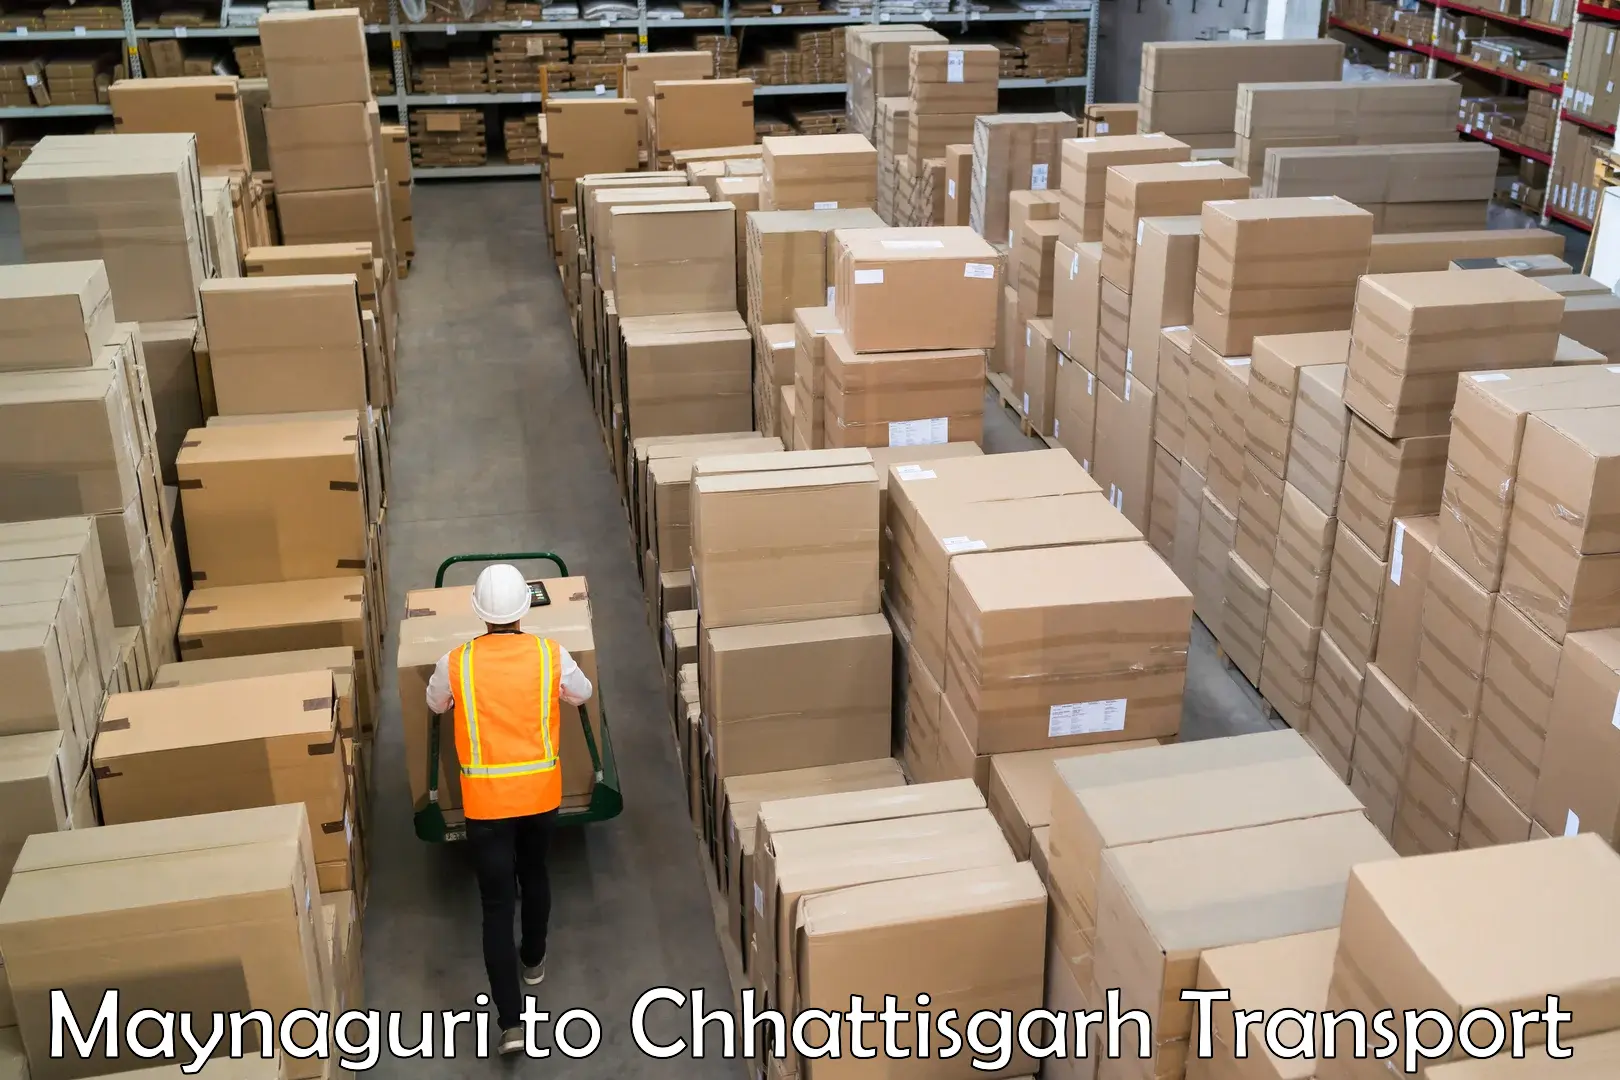 Daily parcel service transport in Maynaguri to Dongargarh